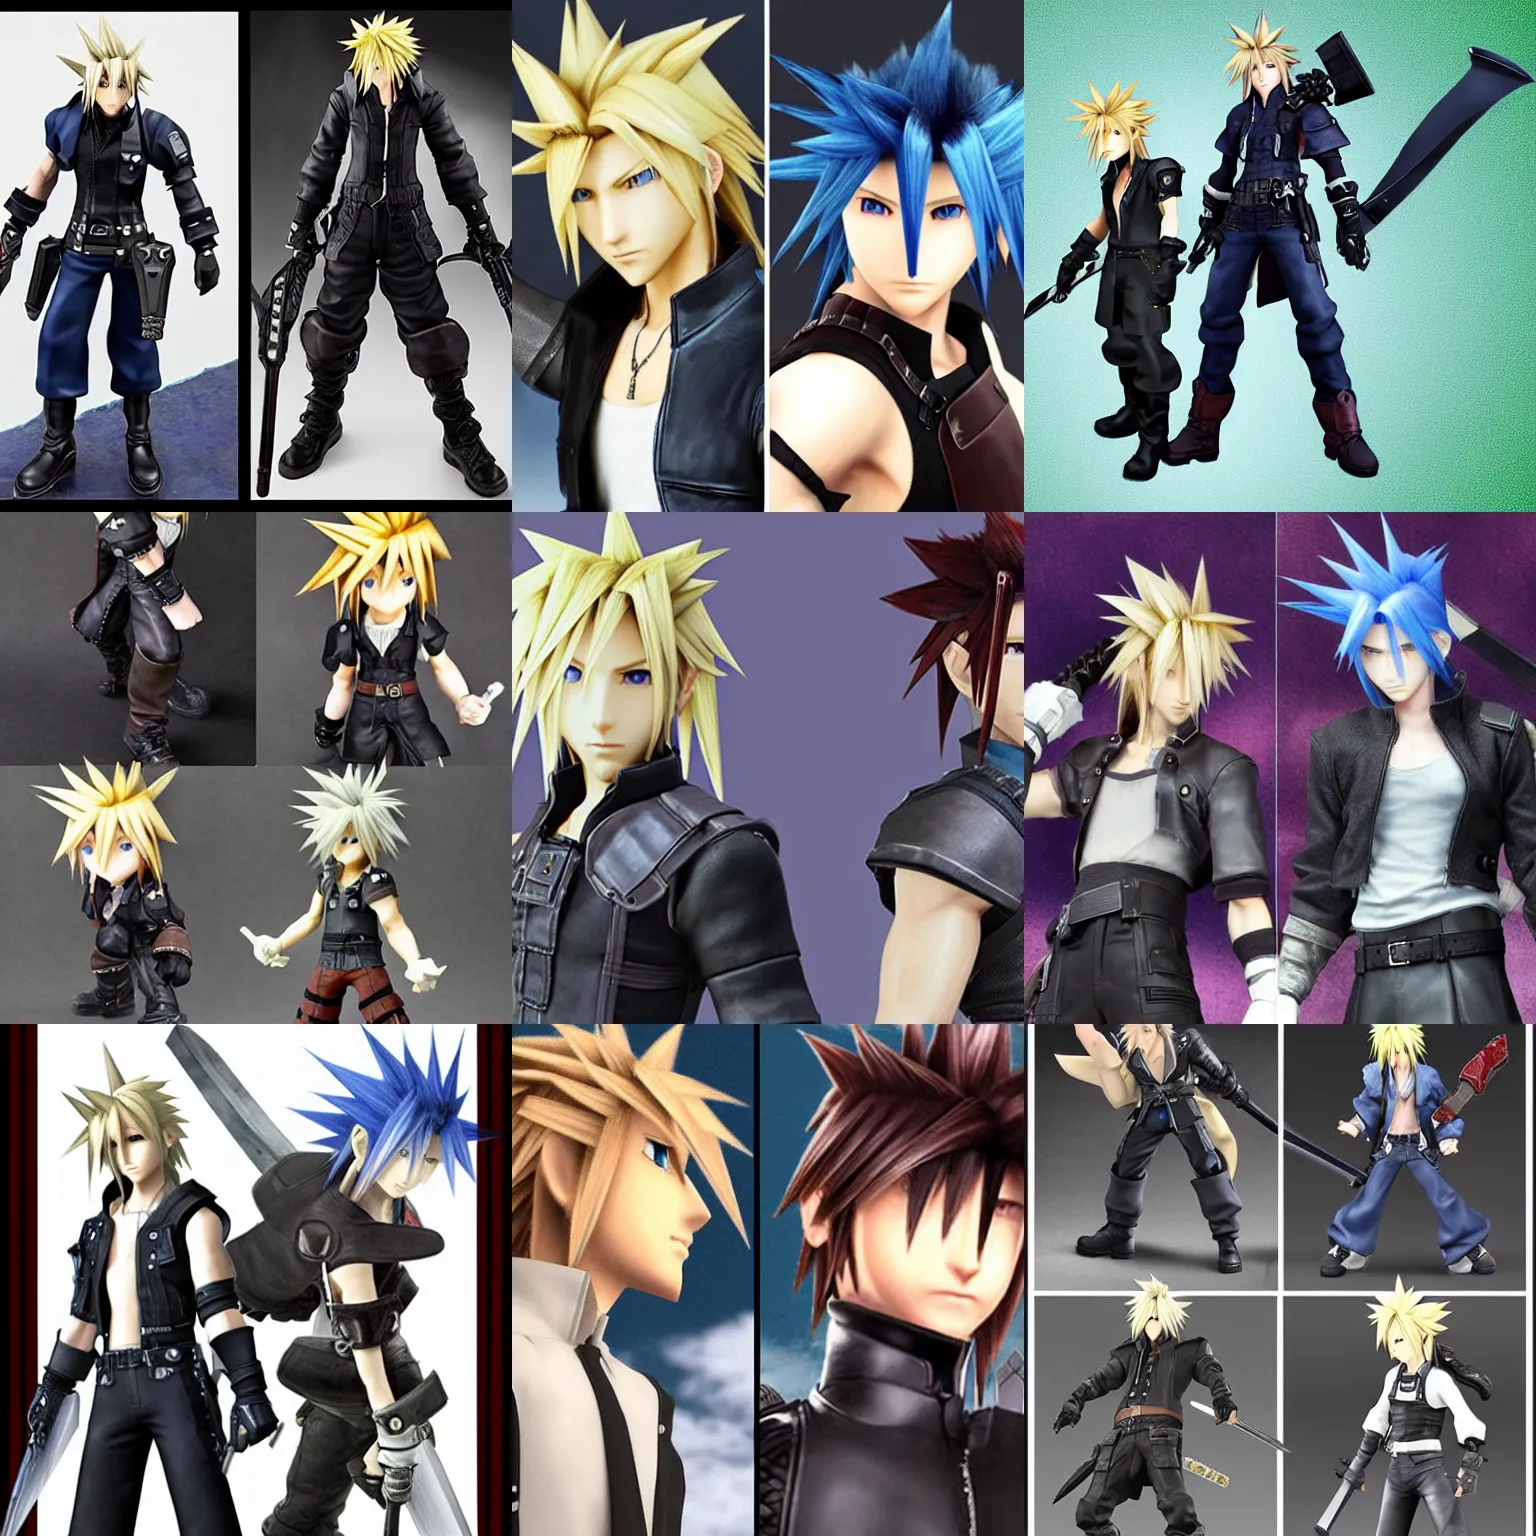 Prompt: cloud strife and barret wallace back - to - back by tetsuya nomura